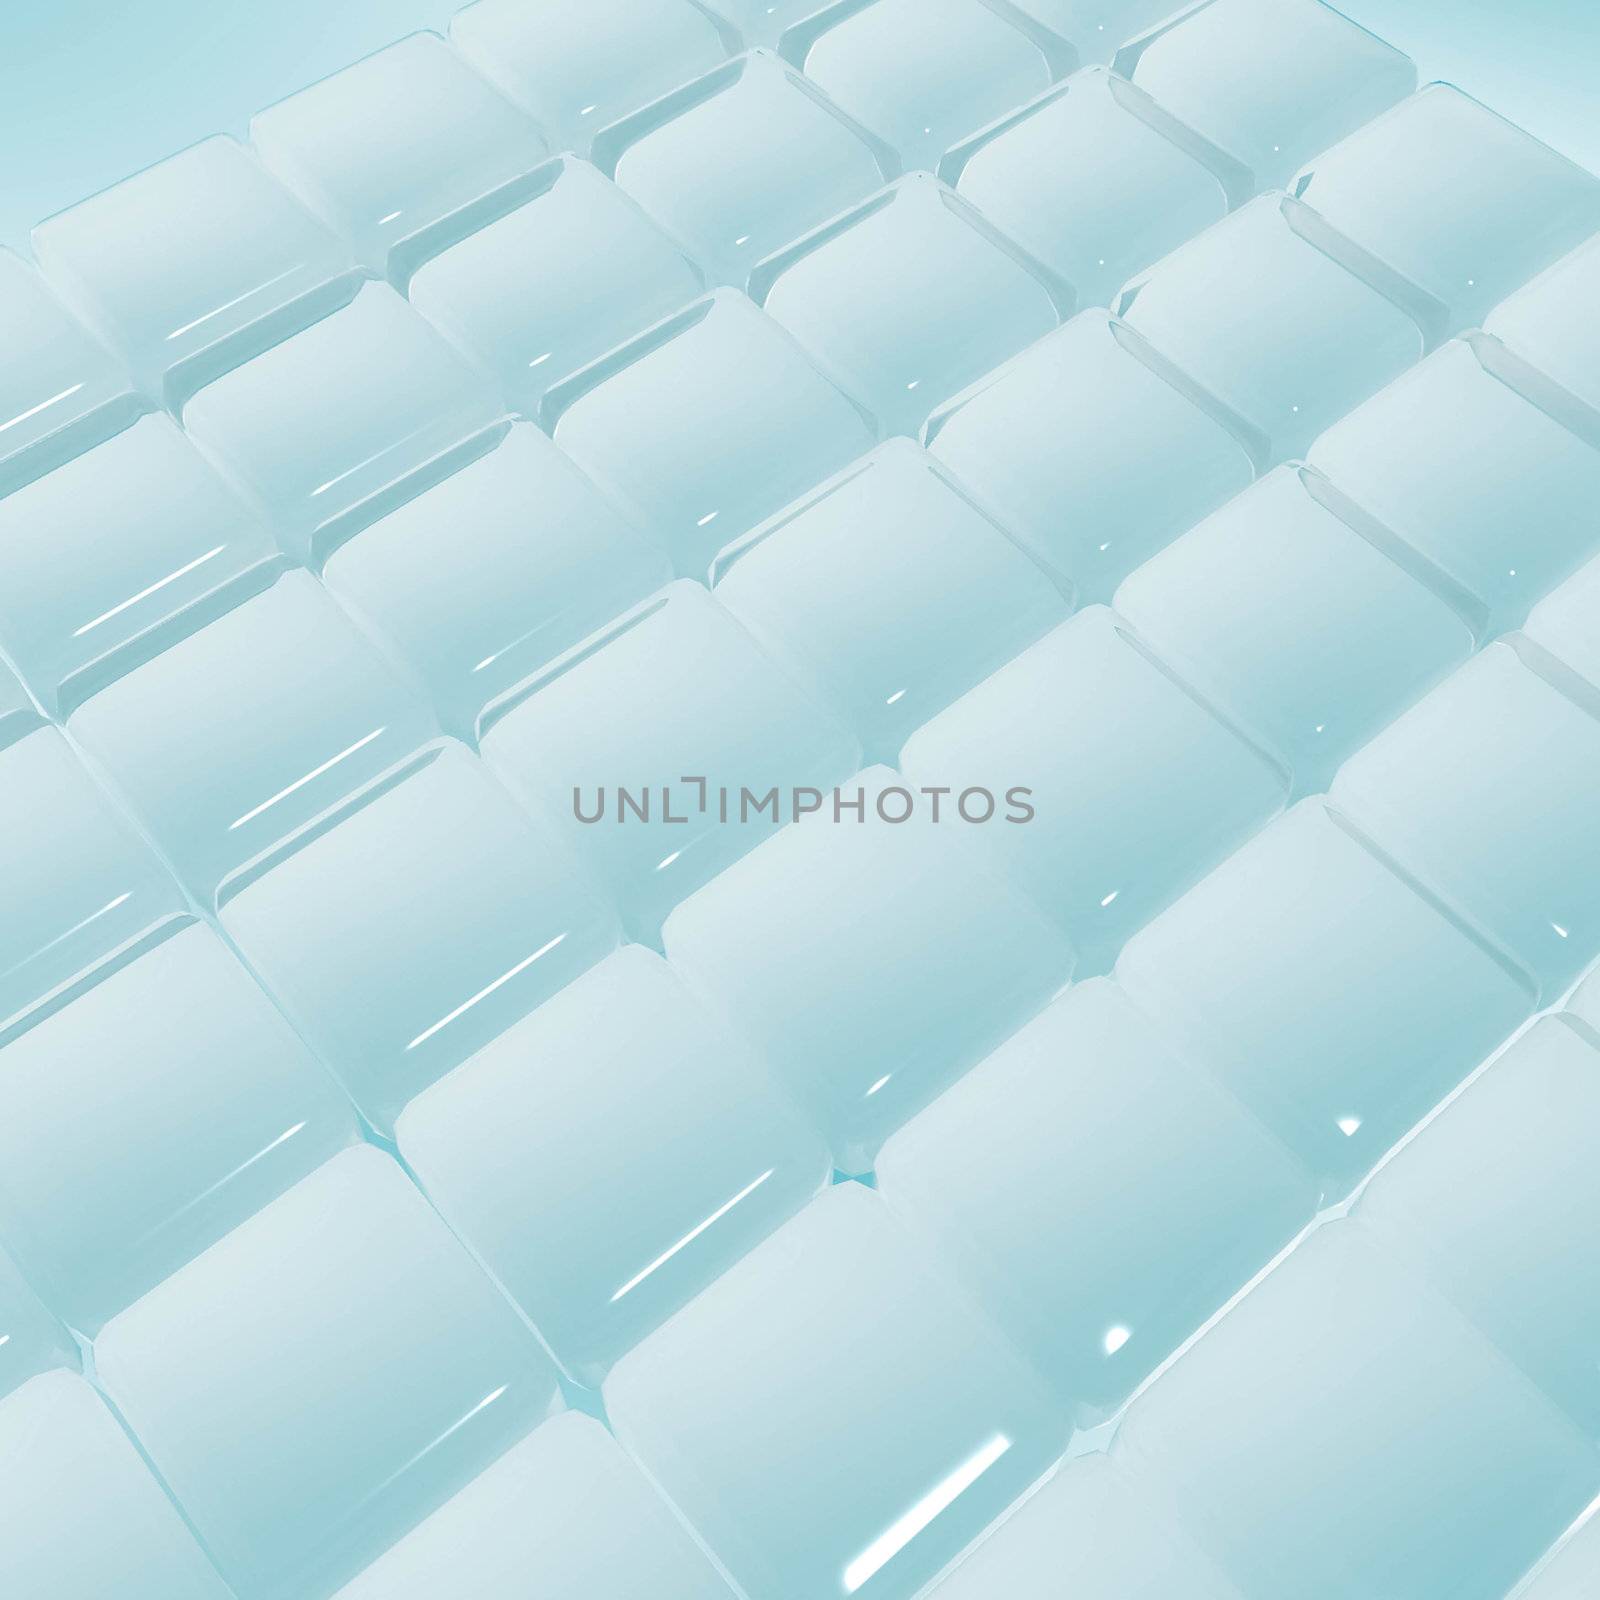 Smooth ice block pattern background by sasilsolutions